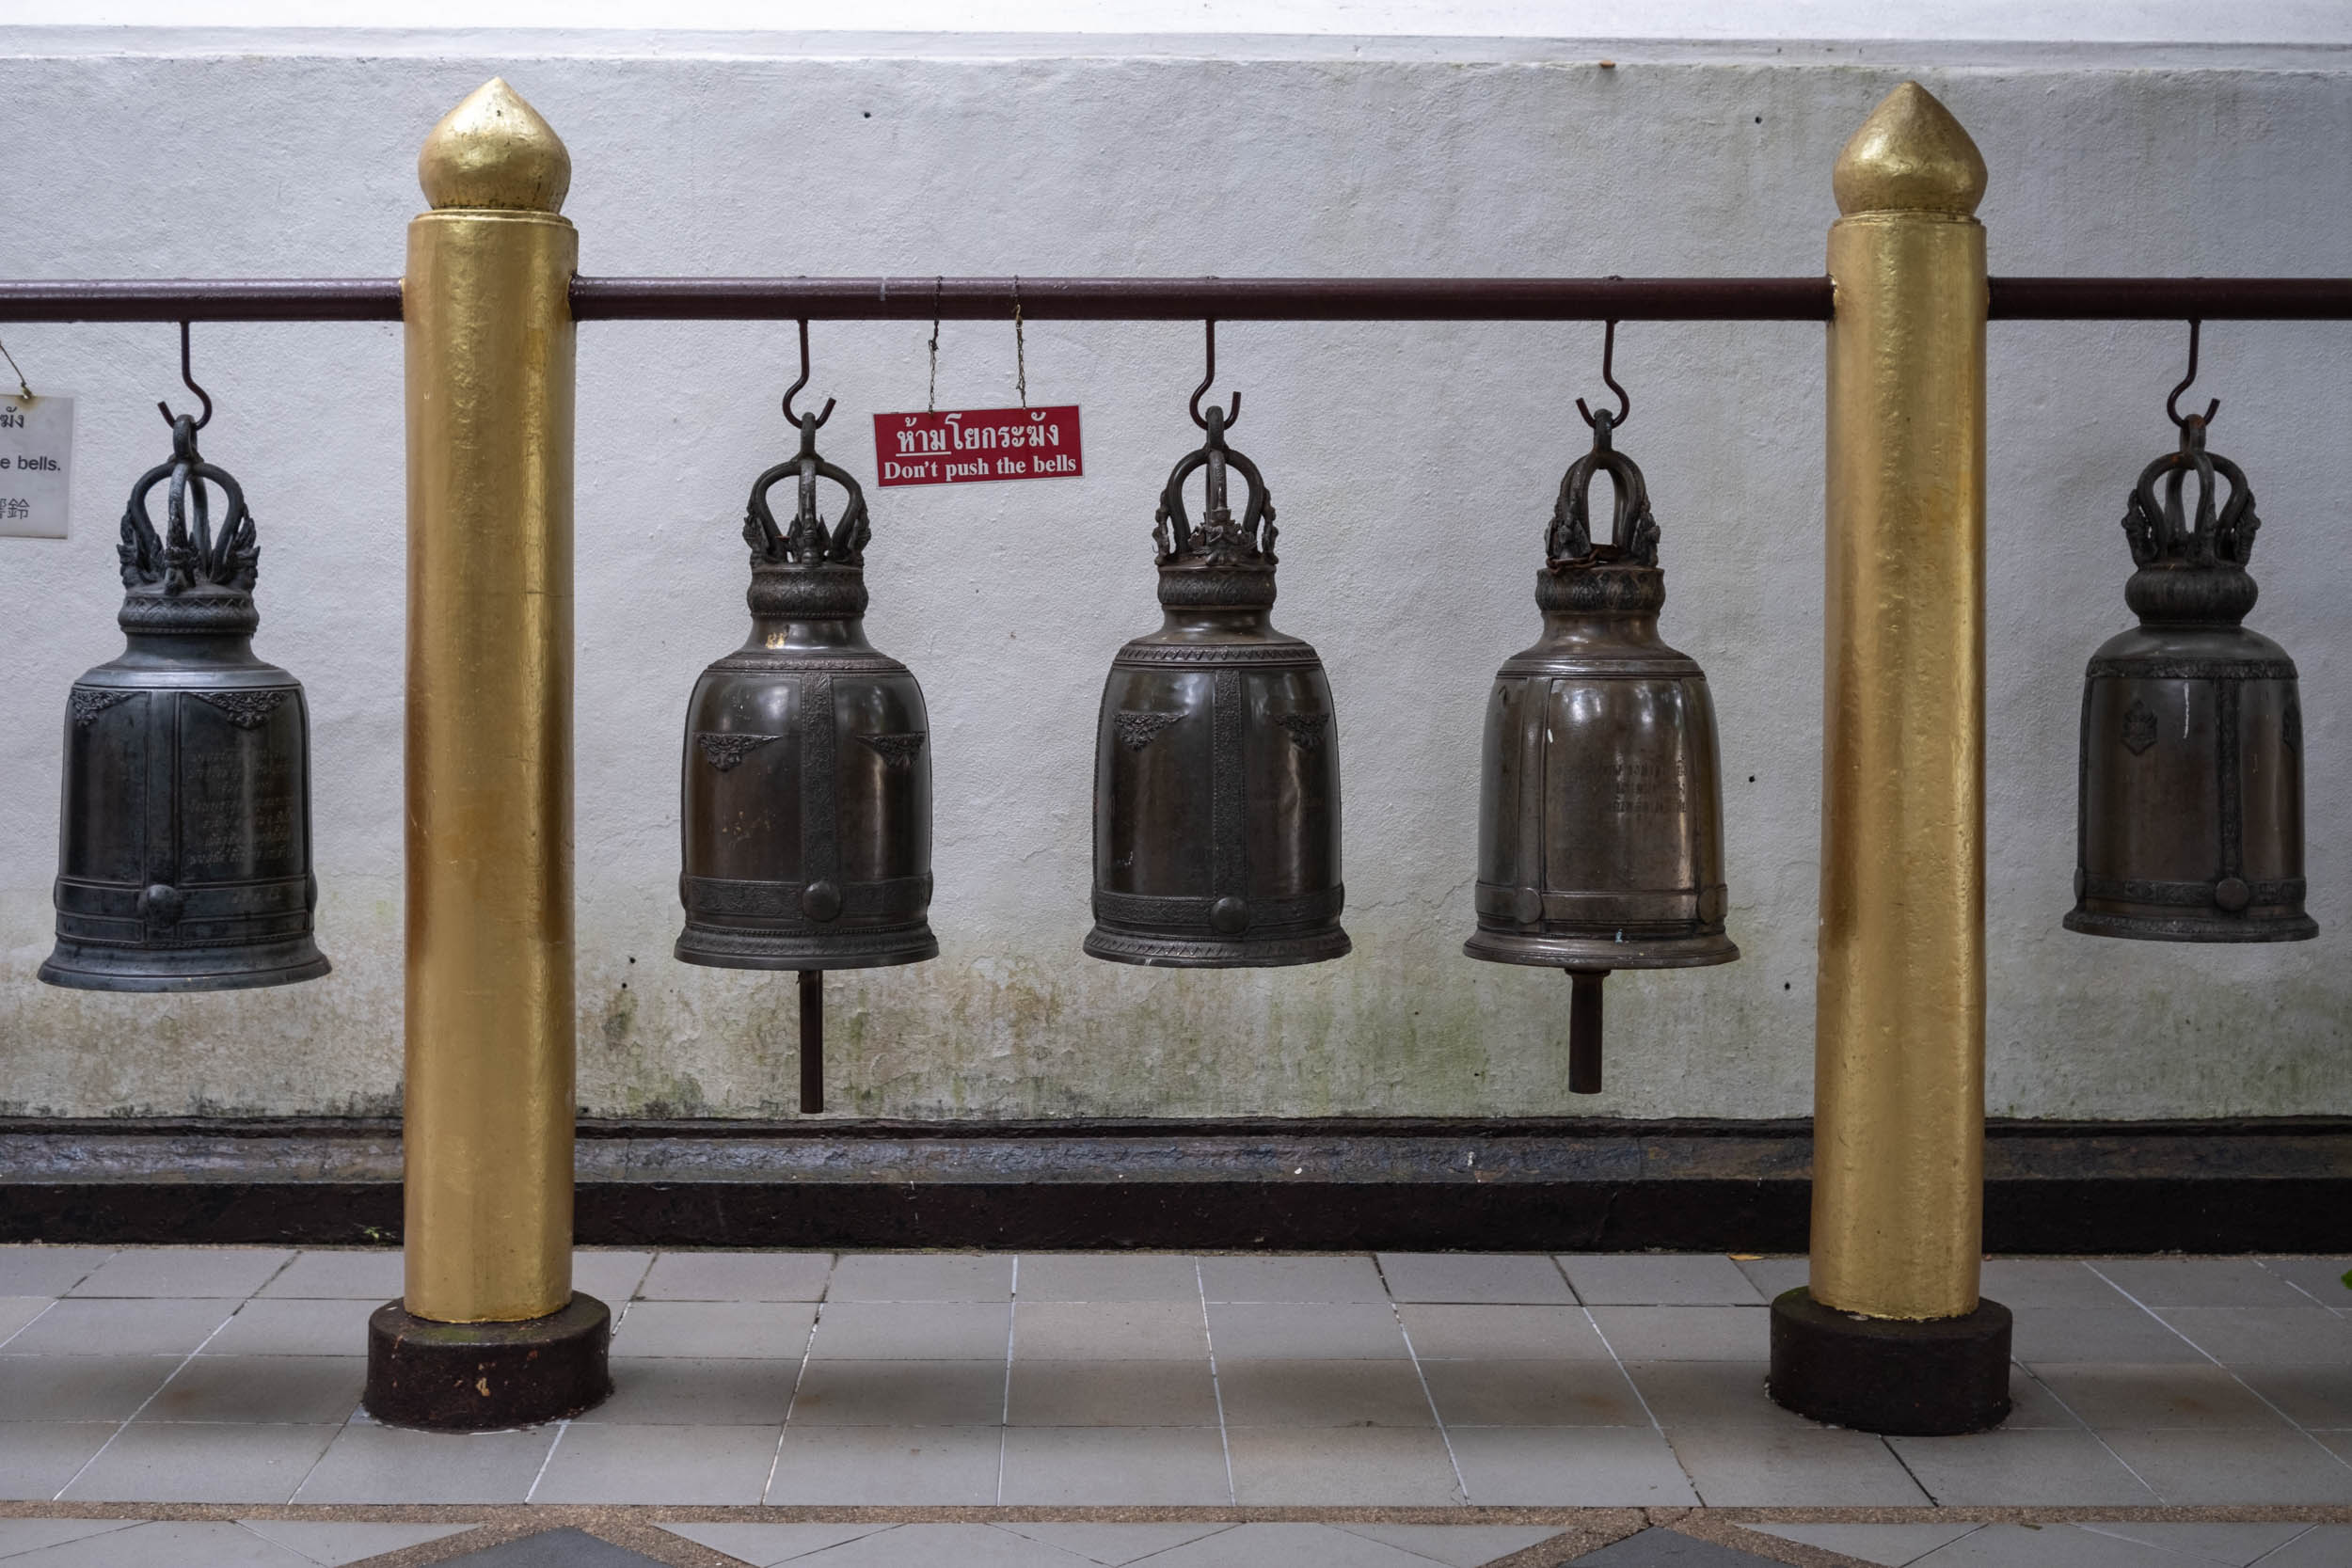 A sign next to some big bells reading "Don't push the bells" at the buddhist temple Wat Phra That Doi Suthep in Chiang Mai.